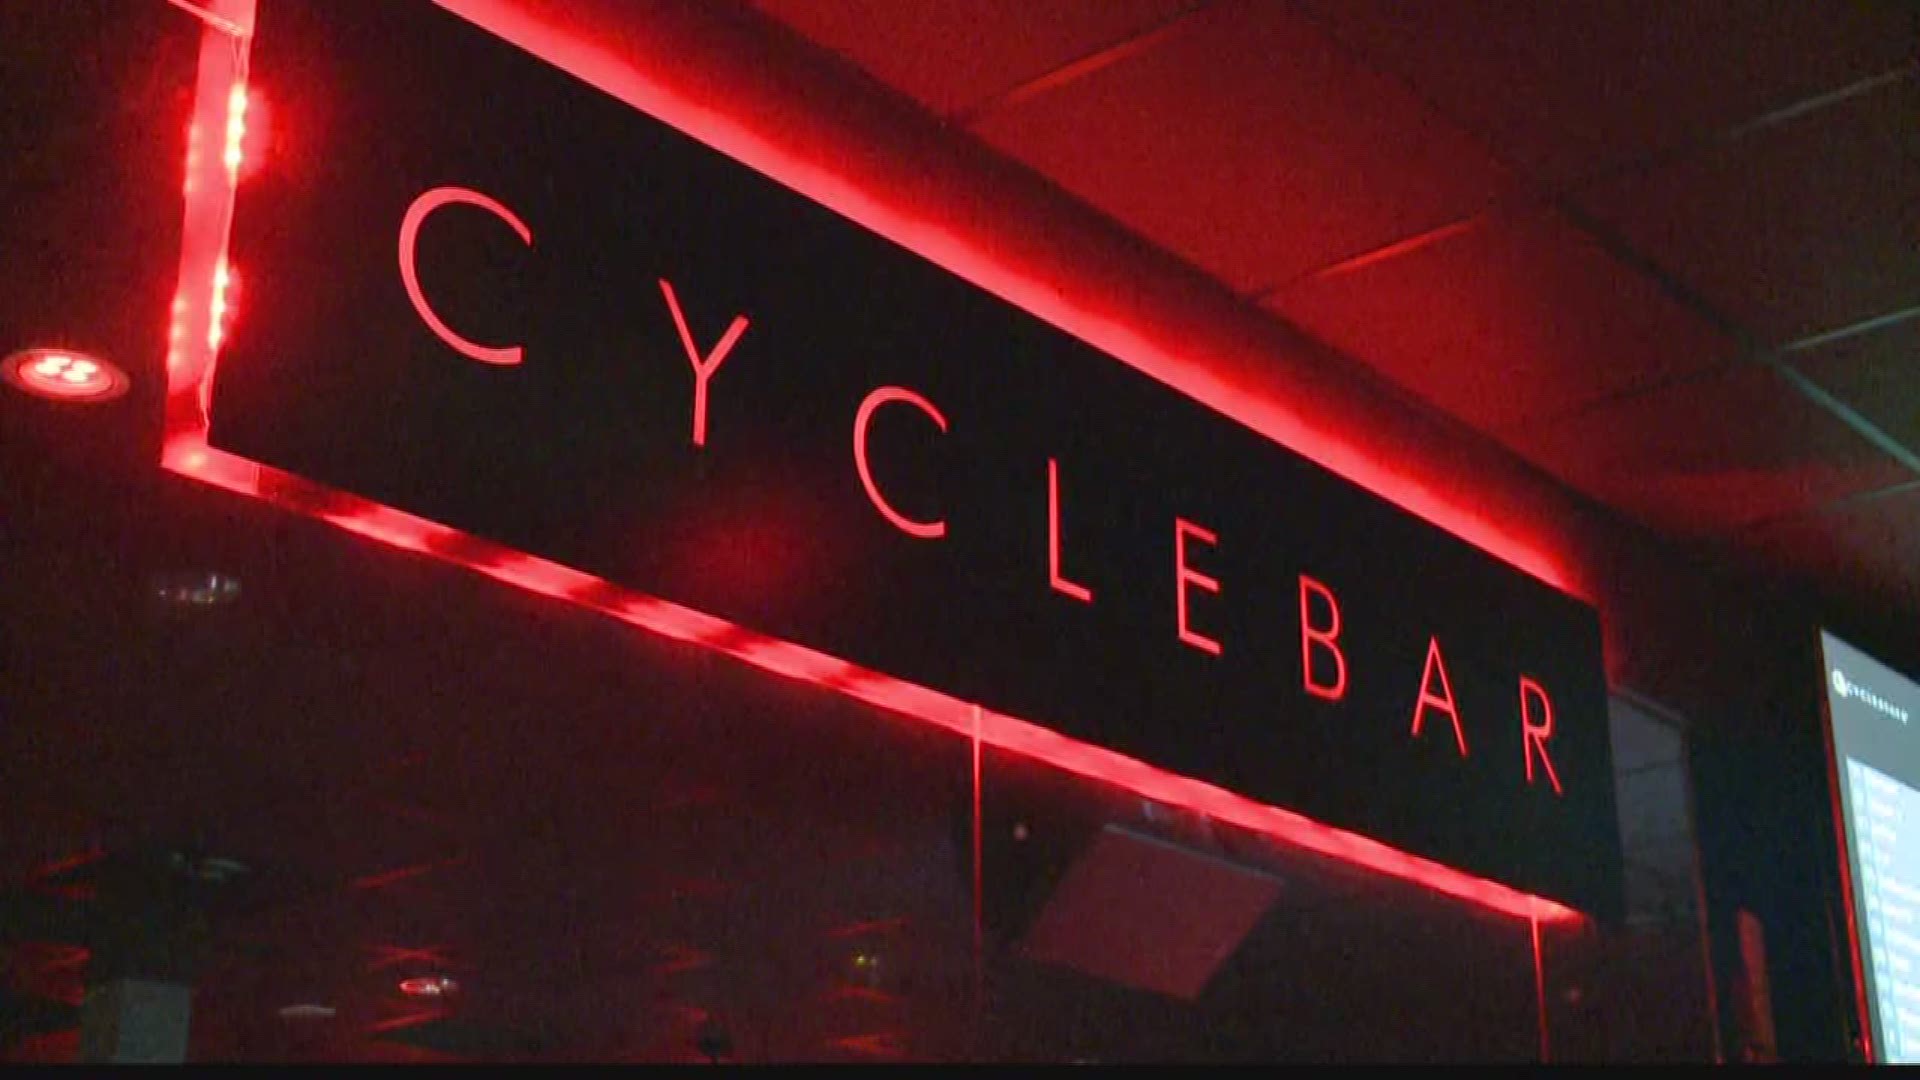 The owner of CycleBar on the South Hill says she doesn't plan on changing anything in light of new COVID-19 restrictions closing gyms for indoor classes.